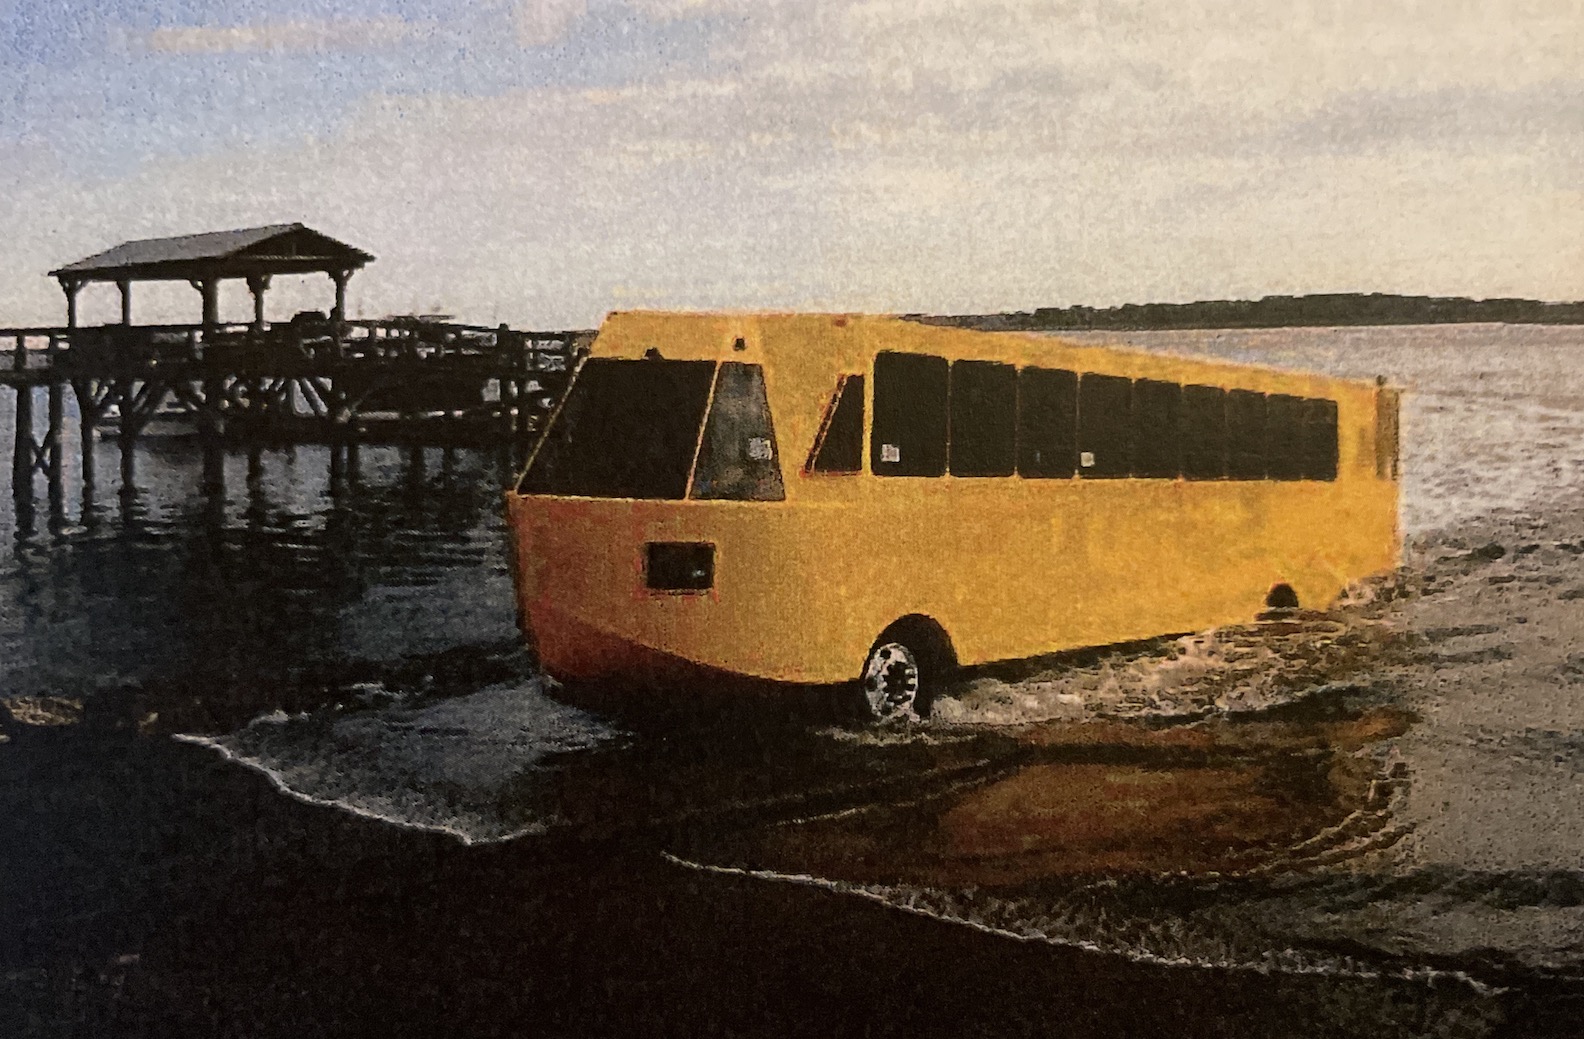 Gray Line Niagara Falls/Buffalo submitted this amphibious vessel photo to the Village of Lewiston.